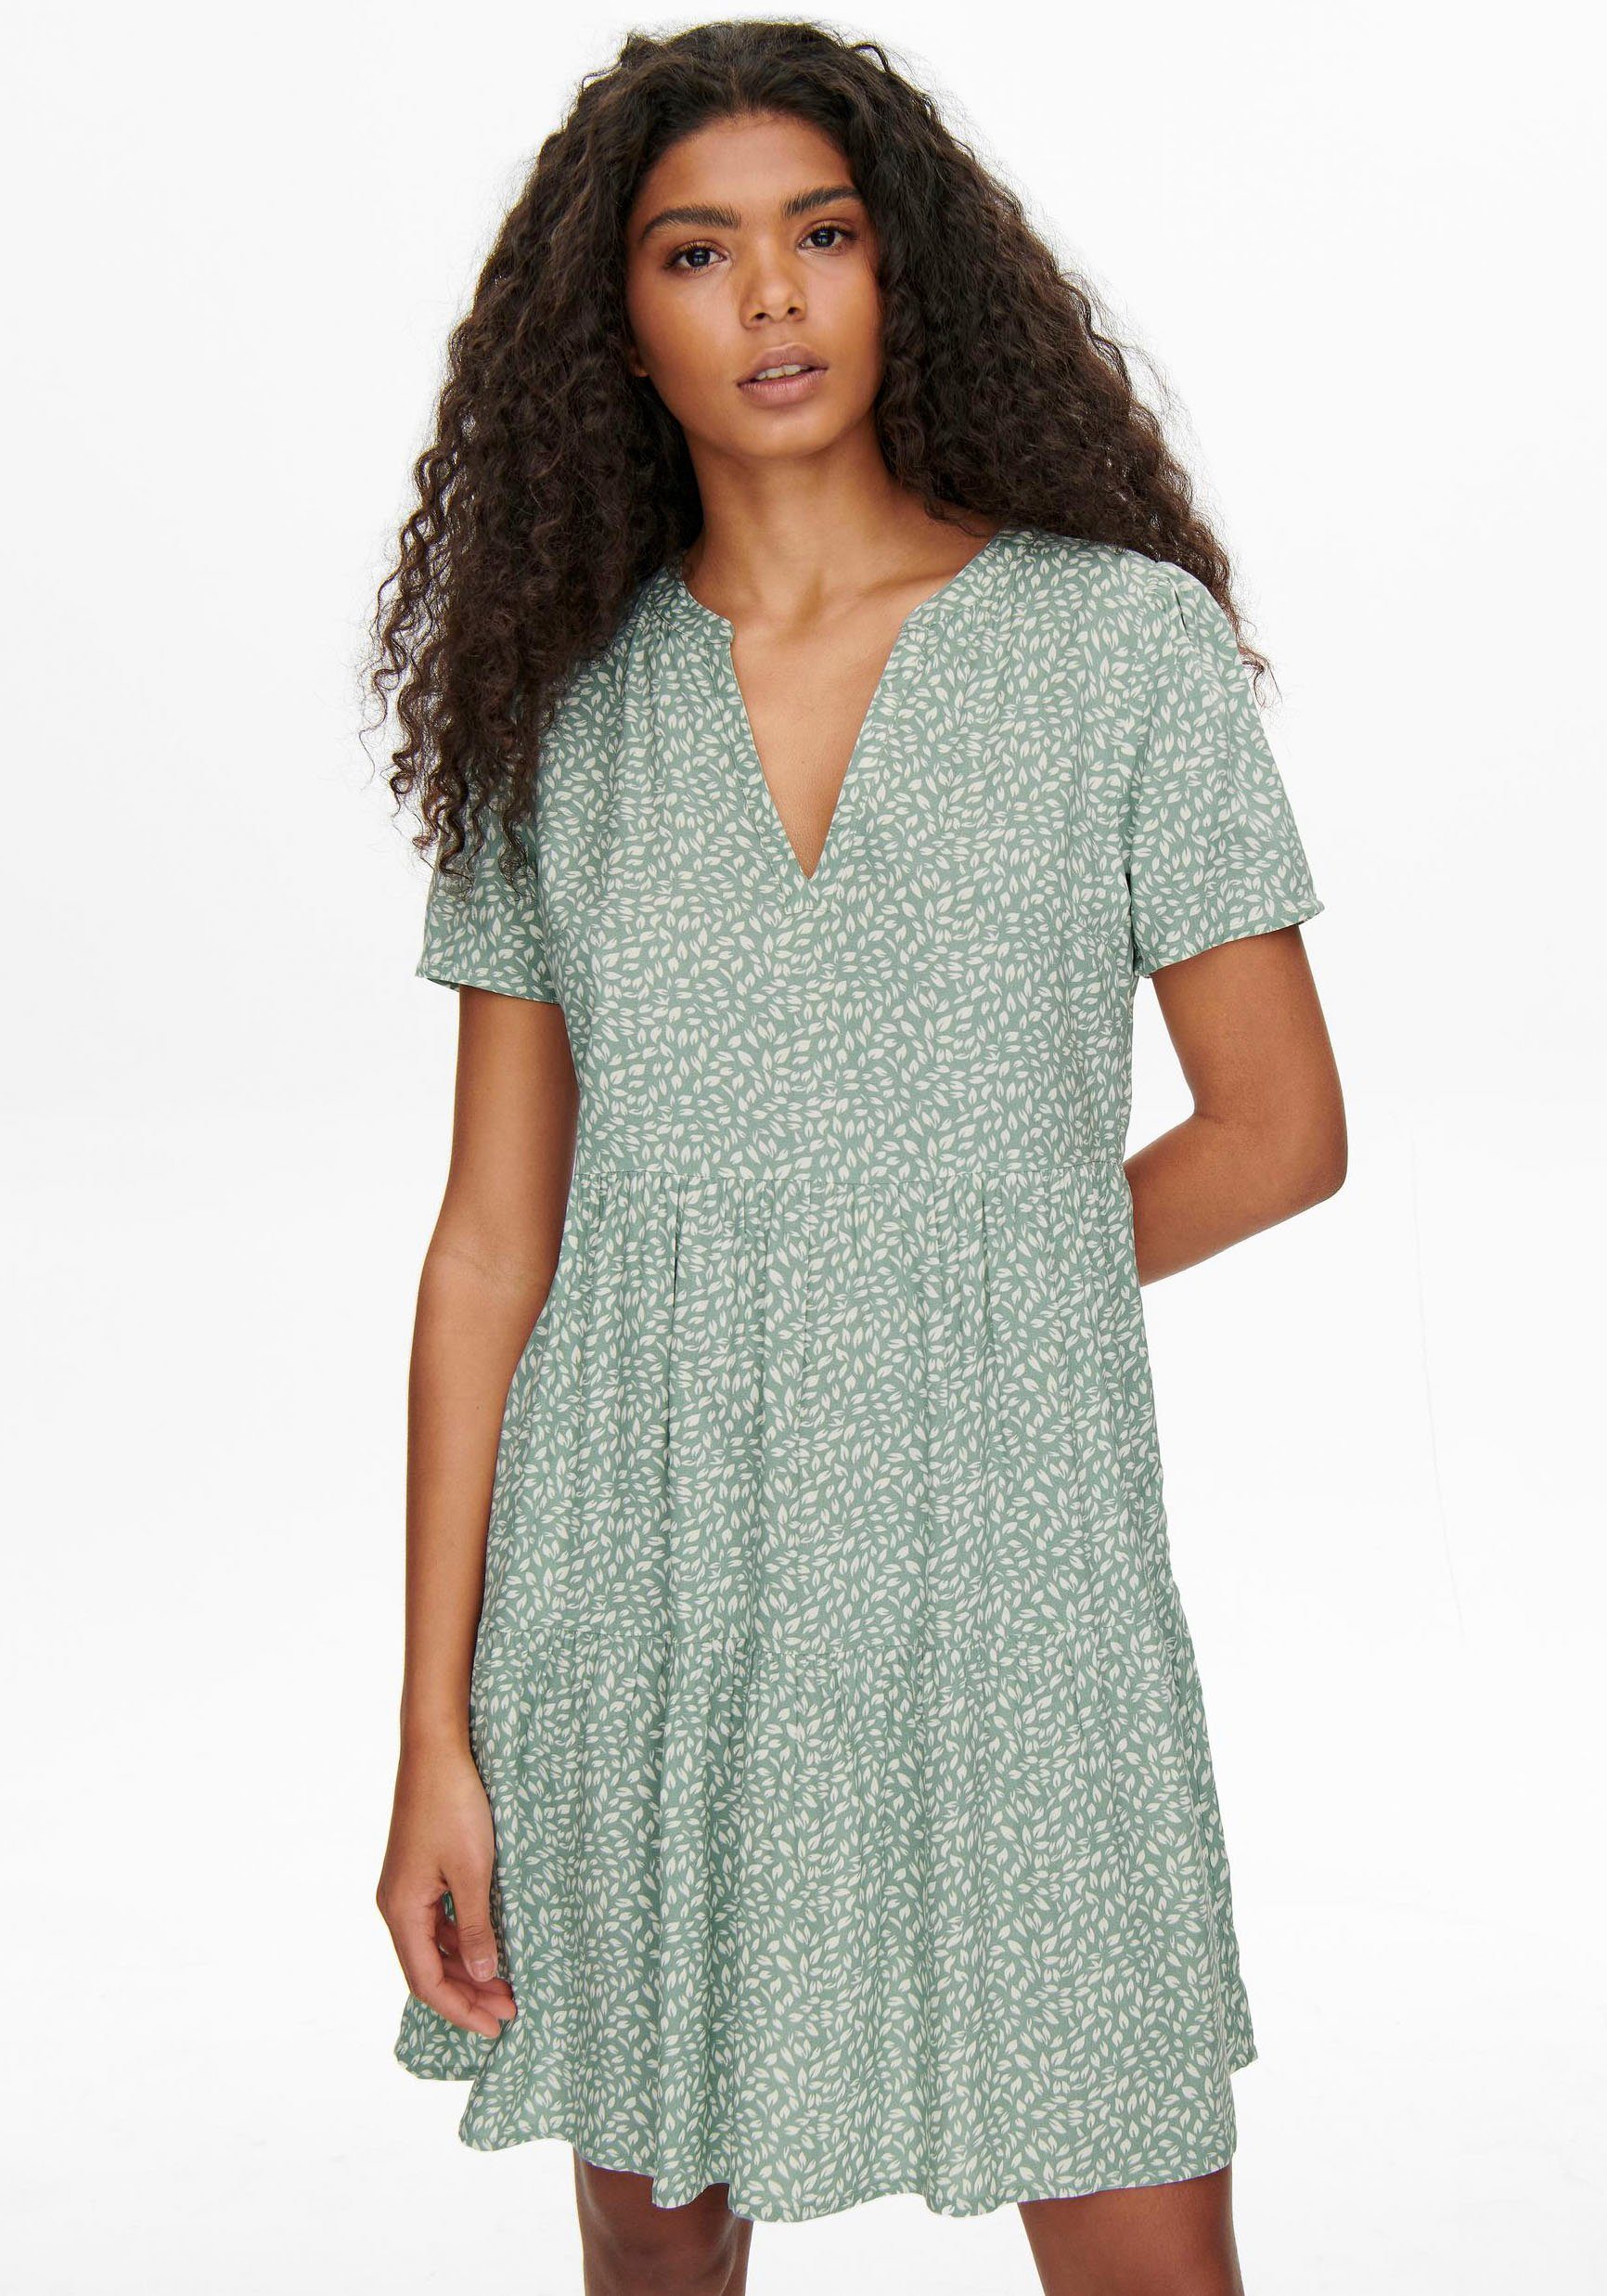 NOOS THEA PTM Green AOP:White leafs ONLZALLY Chinois DRESS S/S Sommerkleid LIFE ONLY